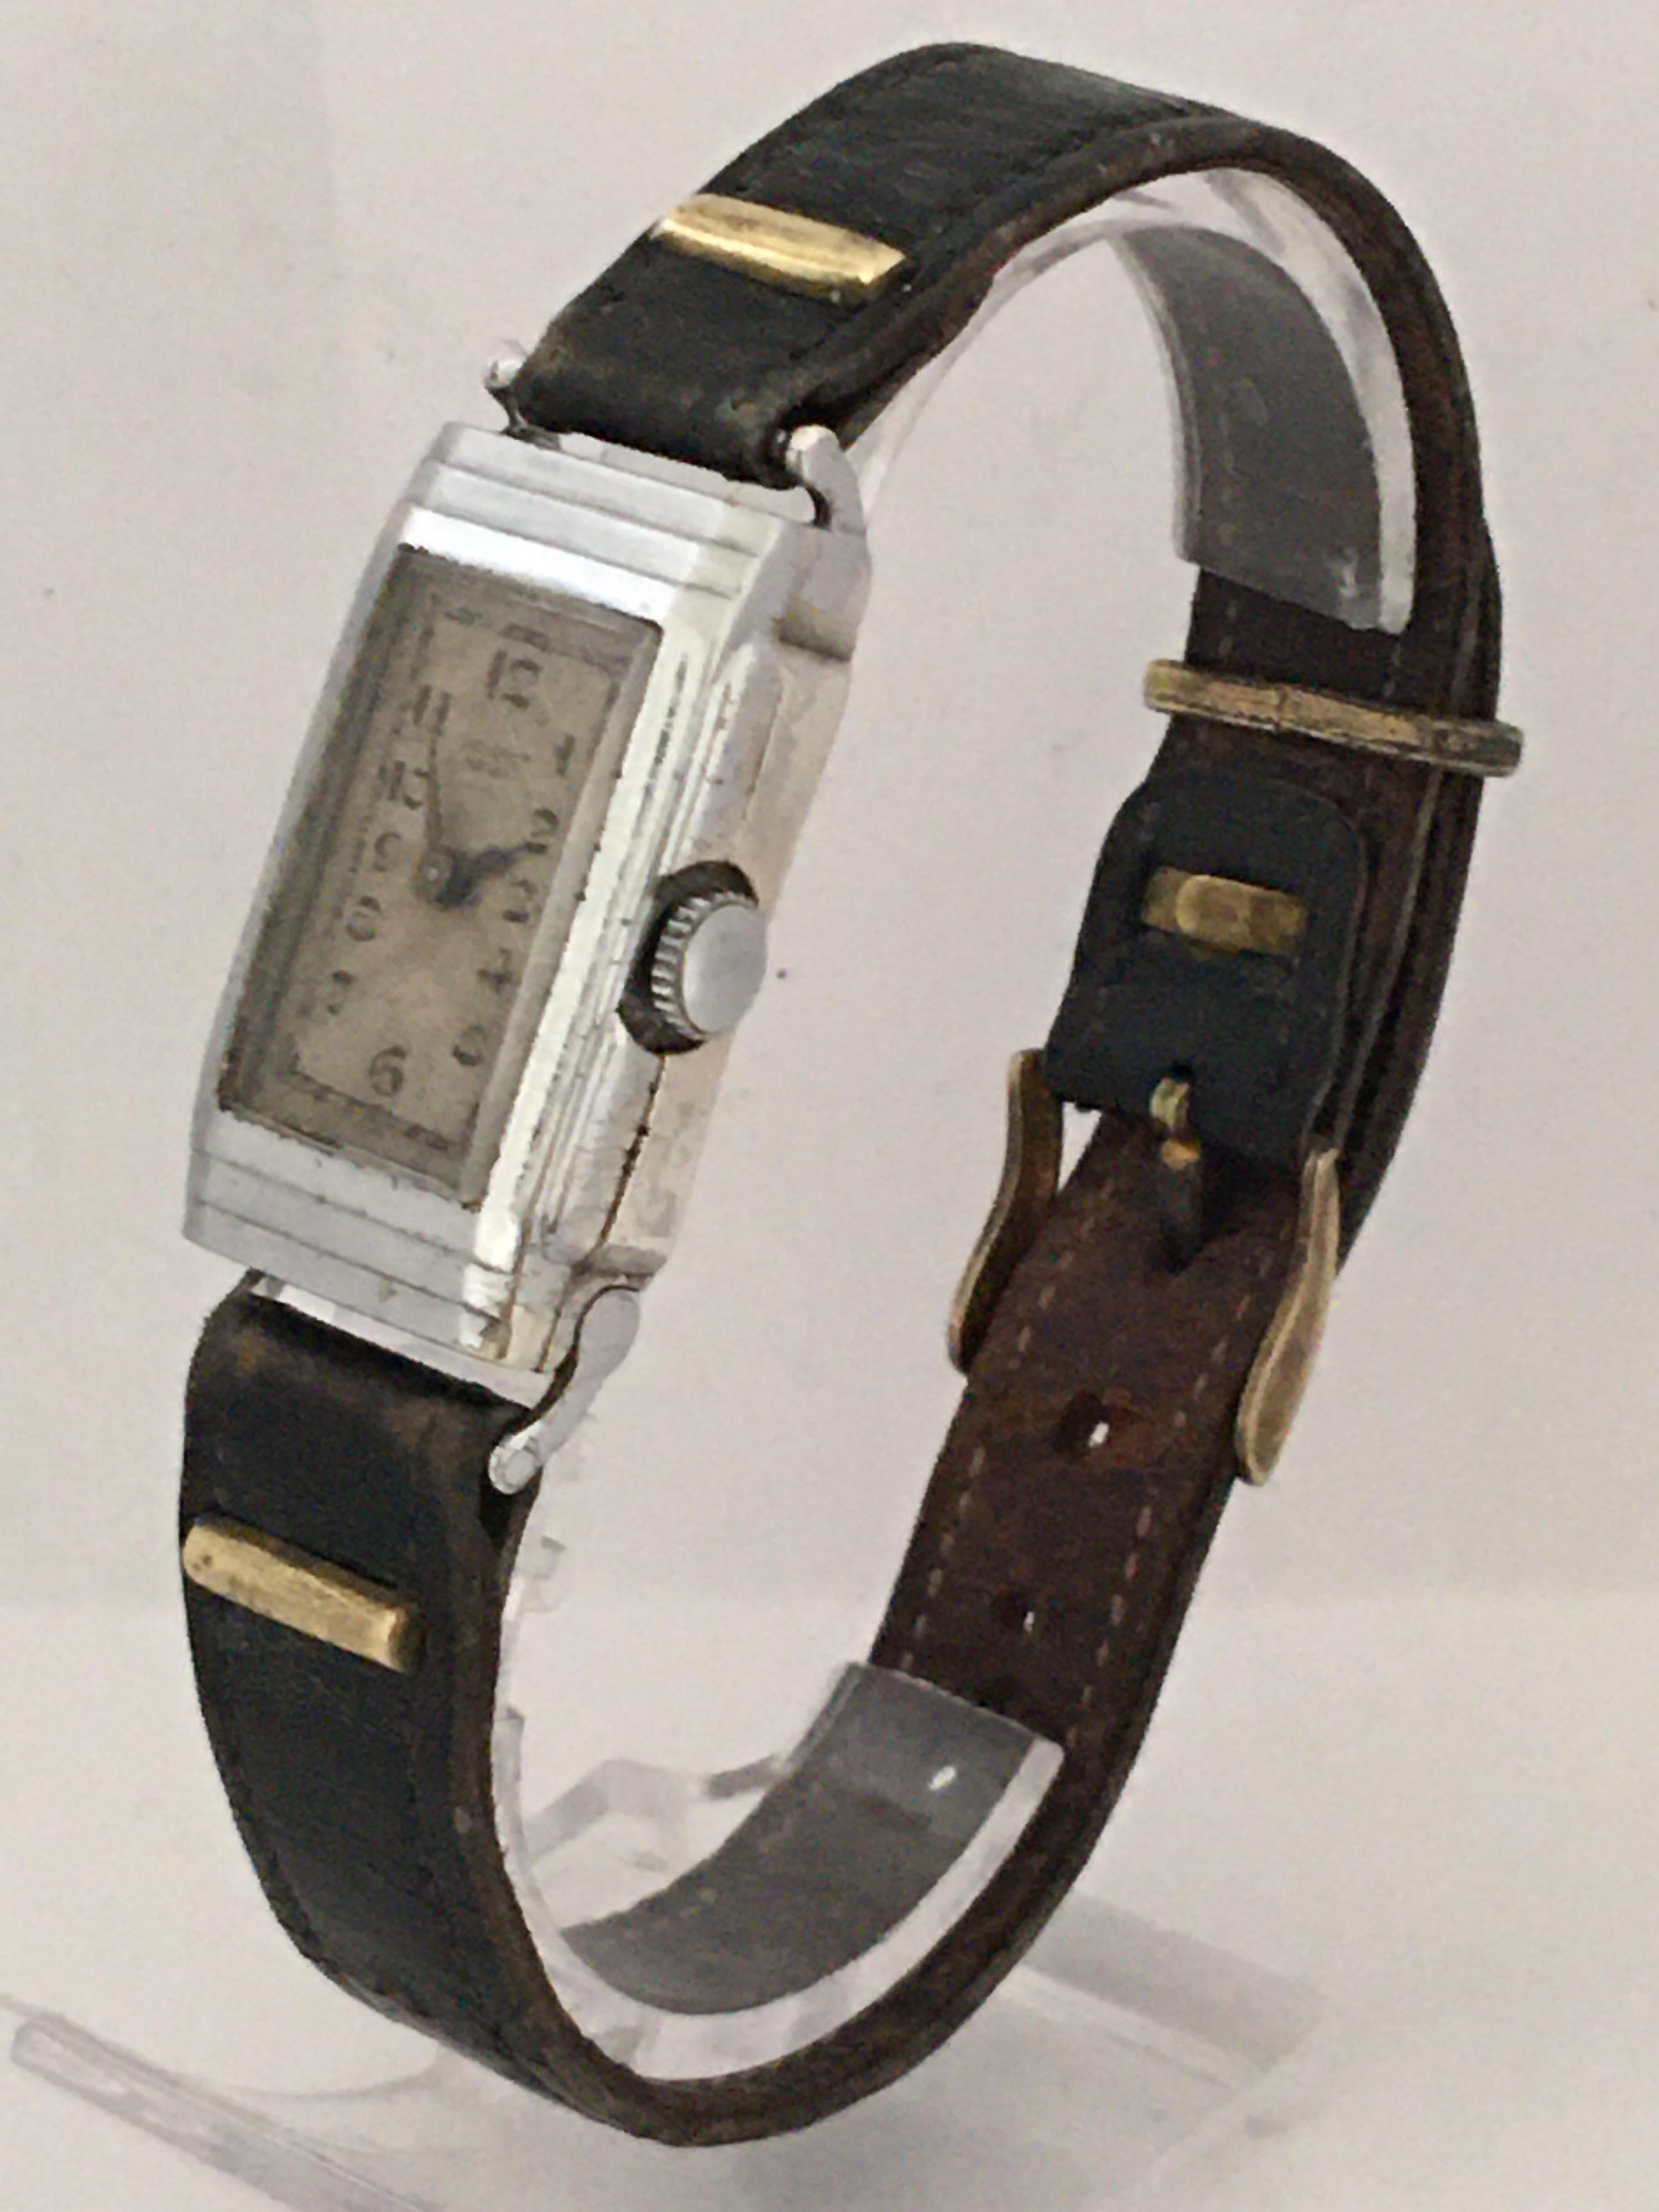 The Autorist wristwatch, an earlier invention by Harwood, relied upon the movement of the wrist, causing the strap to pull against a pivoted retainer, in turn connected to a lever within the movement which kept the mainspring fully